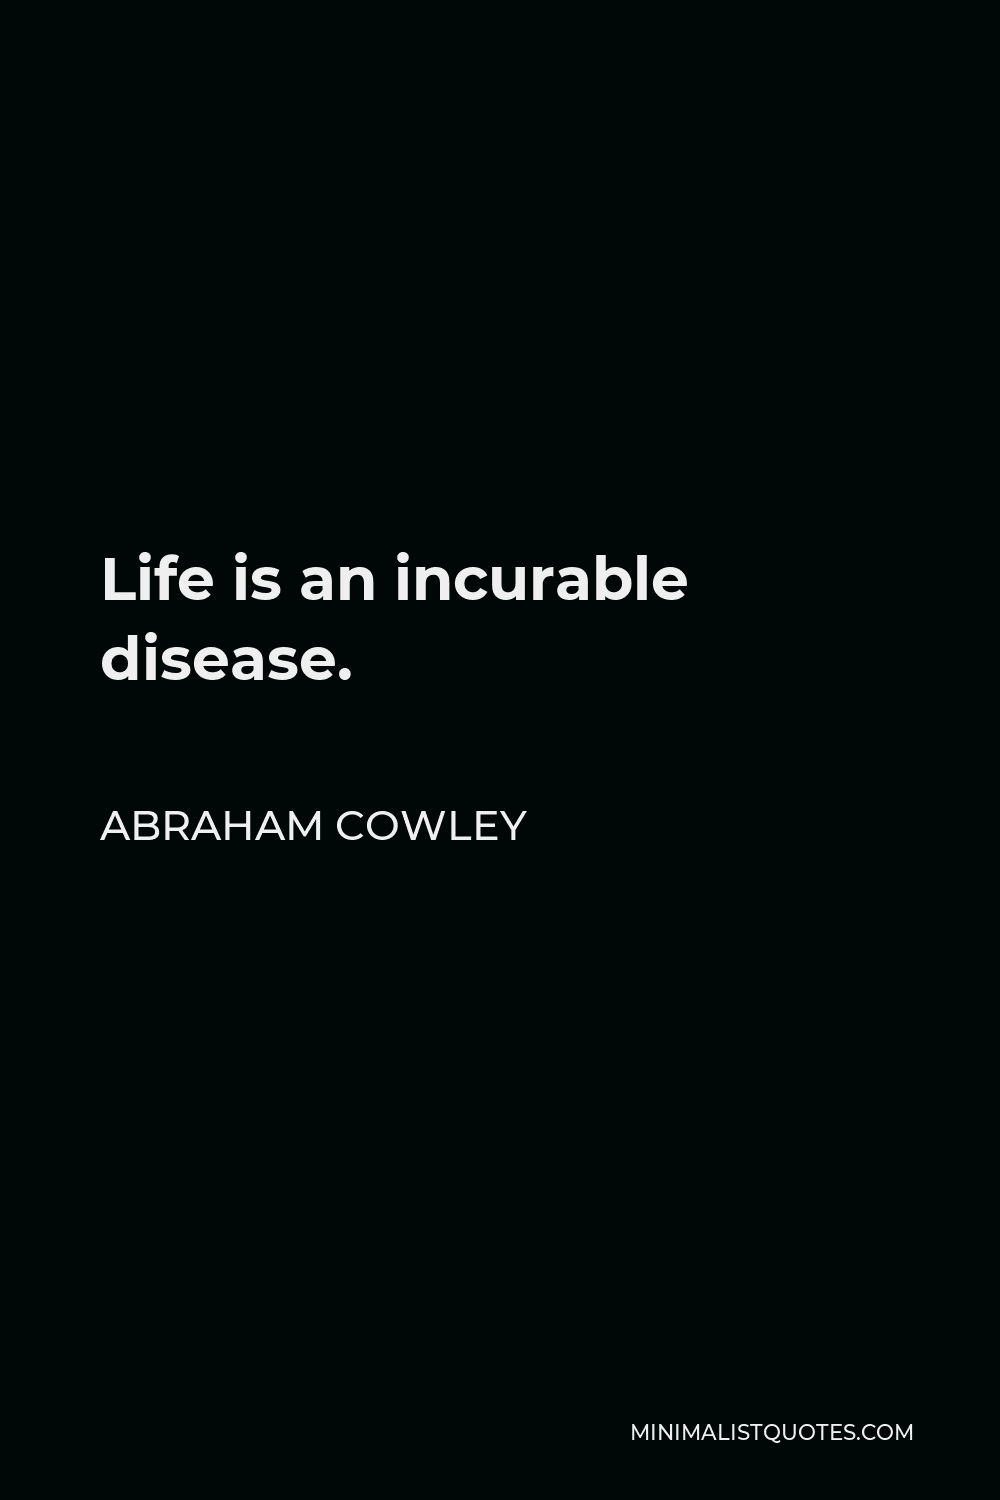 Abraham Cowley Quote - Life is an incurable disease.